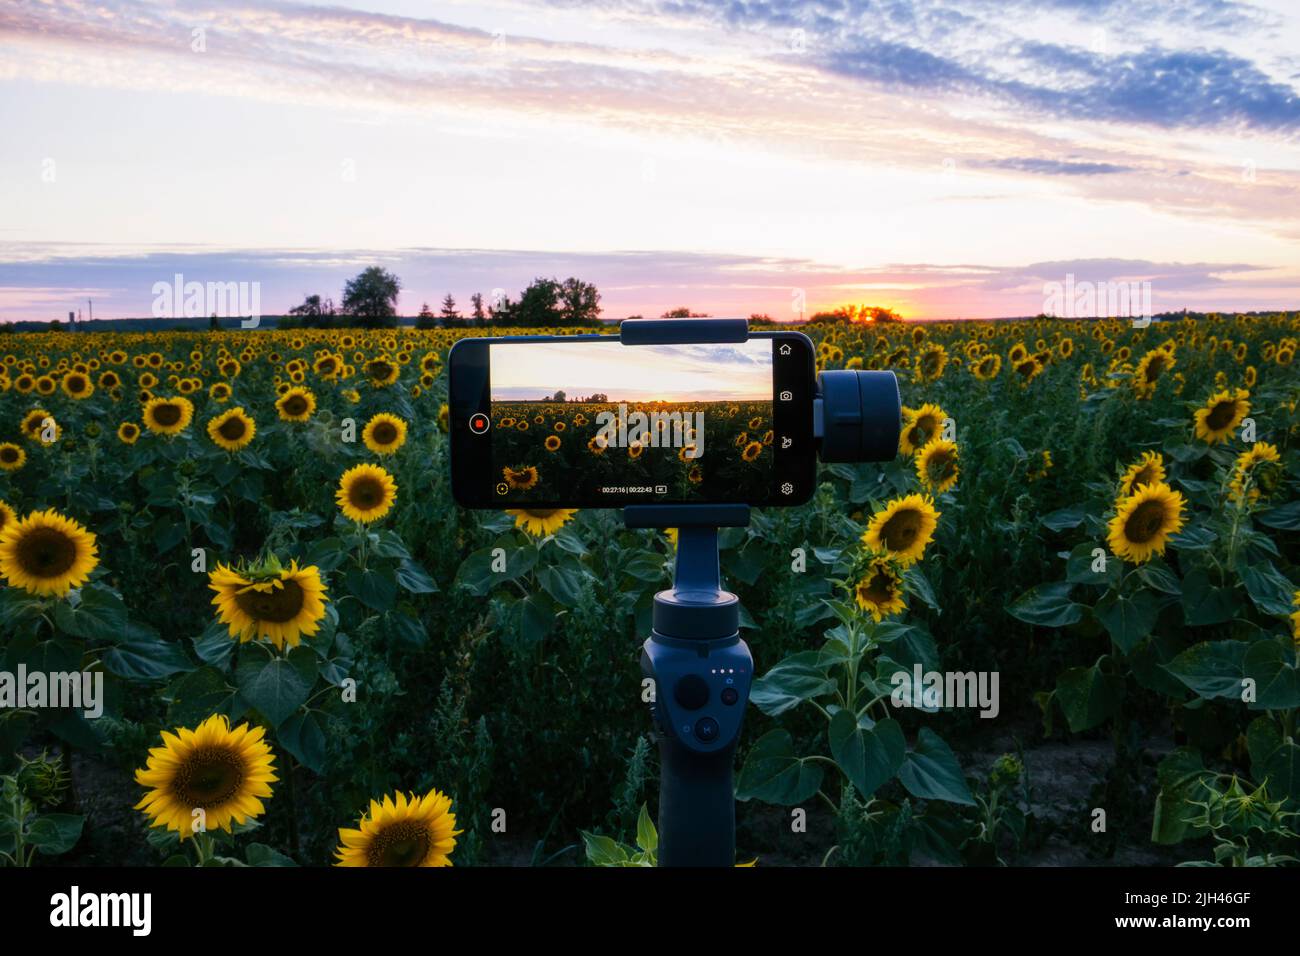 Steadicam for phone that shoots sunflowers Stock Photo